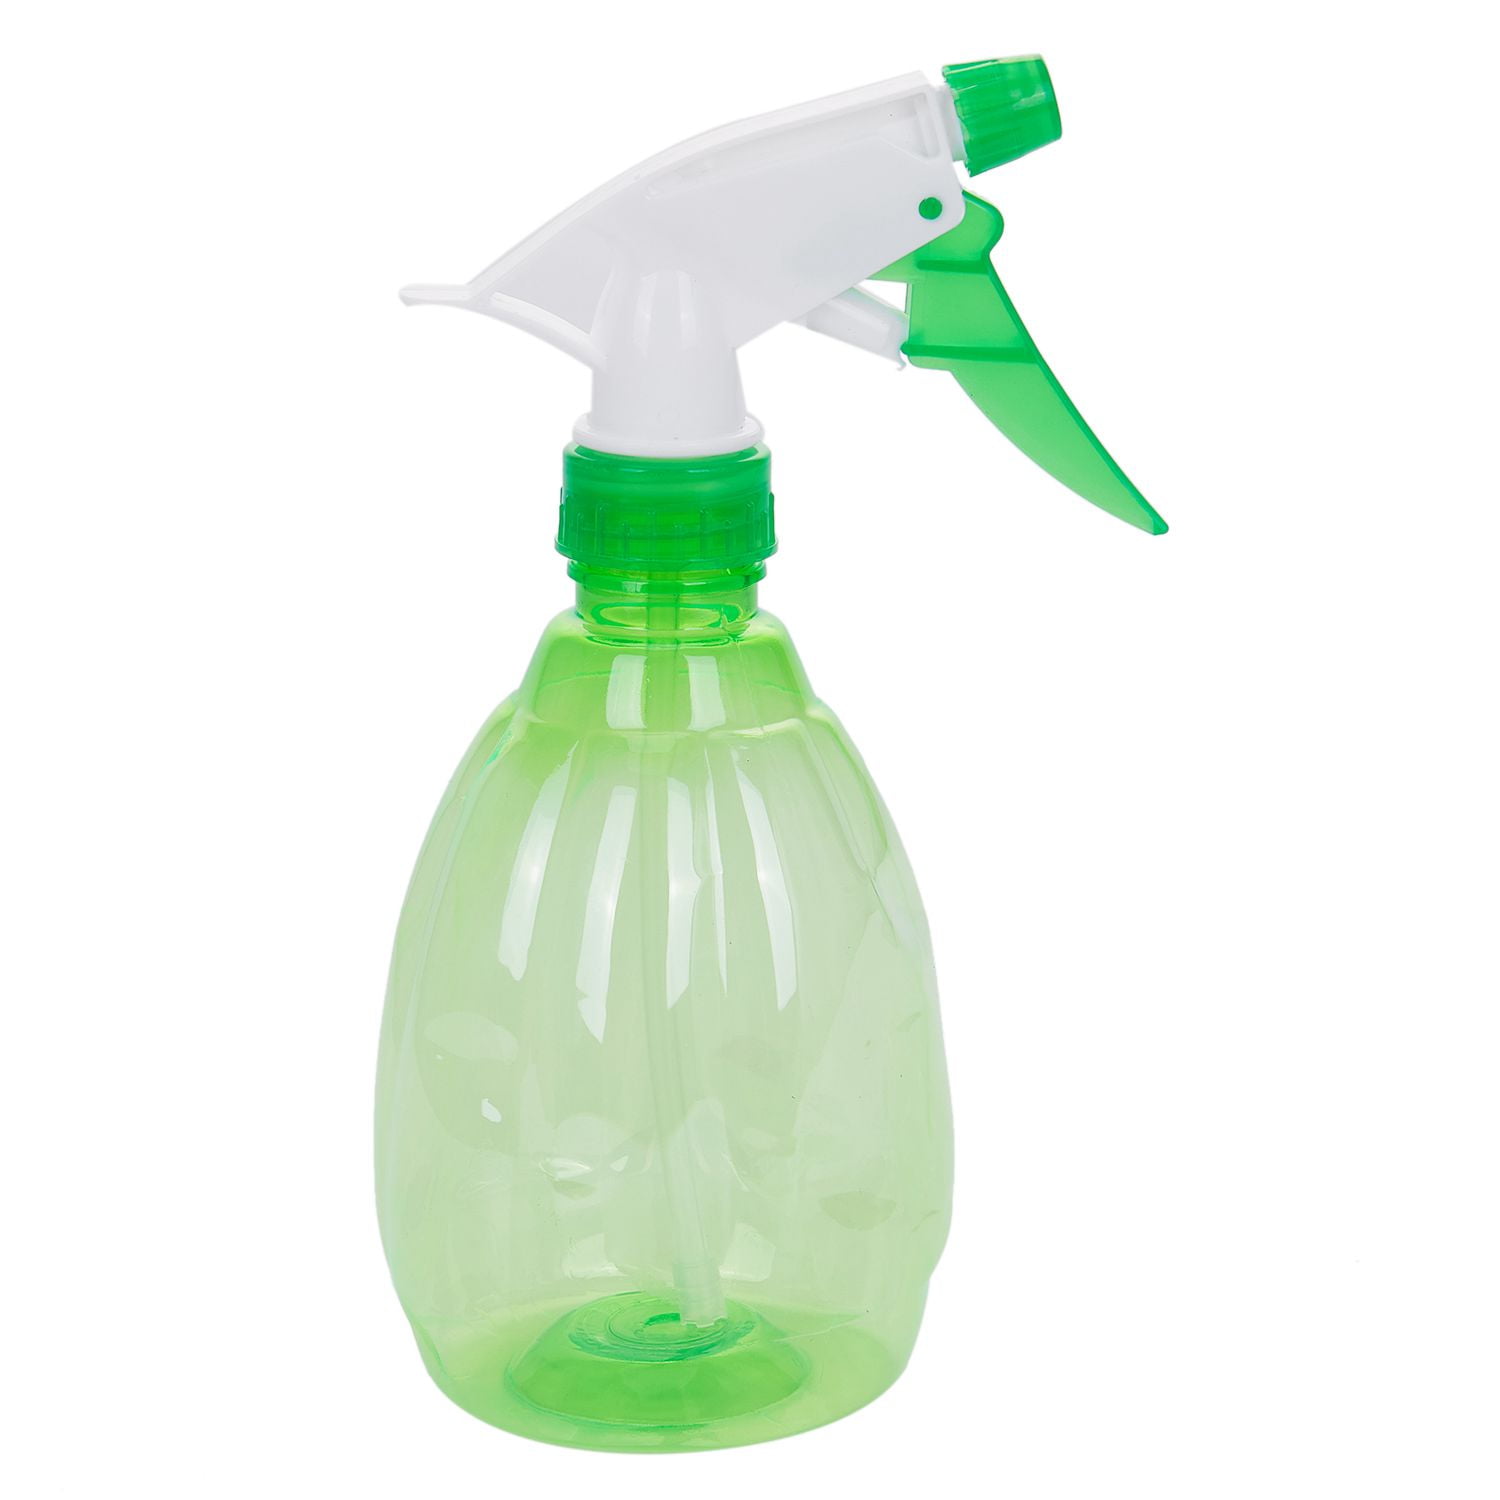 MyLifeUNIT Plastic Watering Can Green Water Spray Bottle with Adjustable Pressure Nozzle for Plants and Cleaning Work 1/2-Gallon 